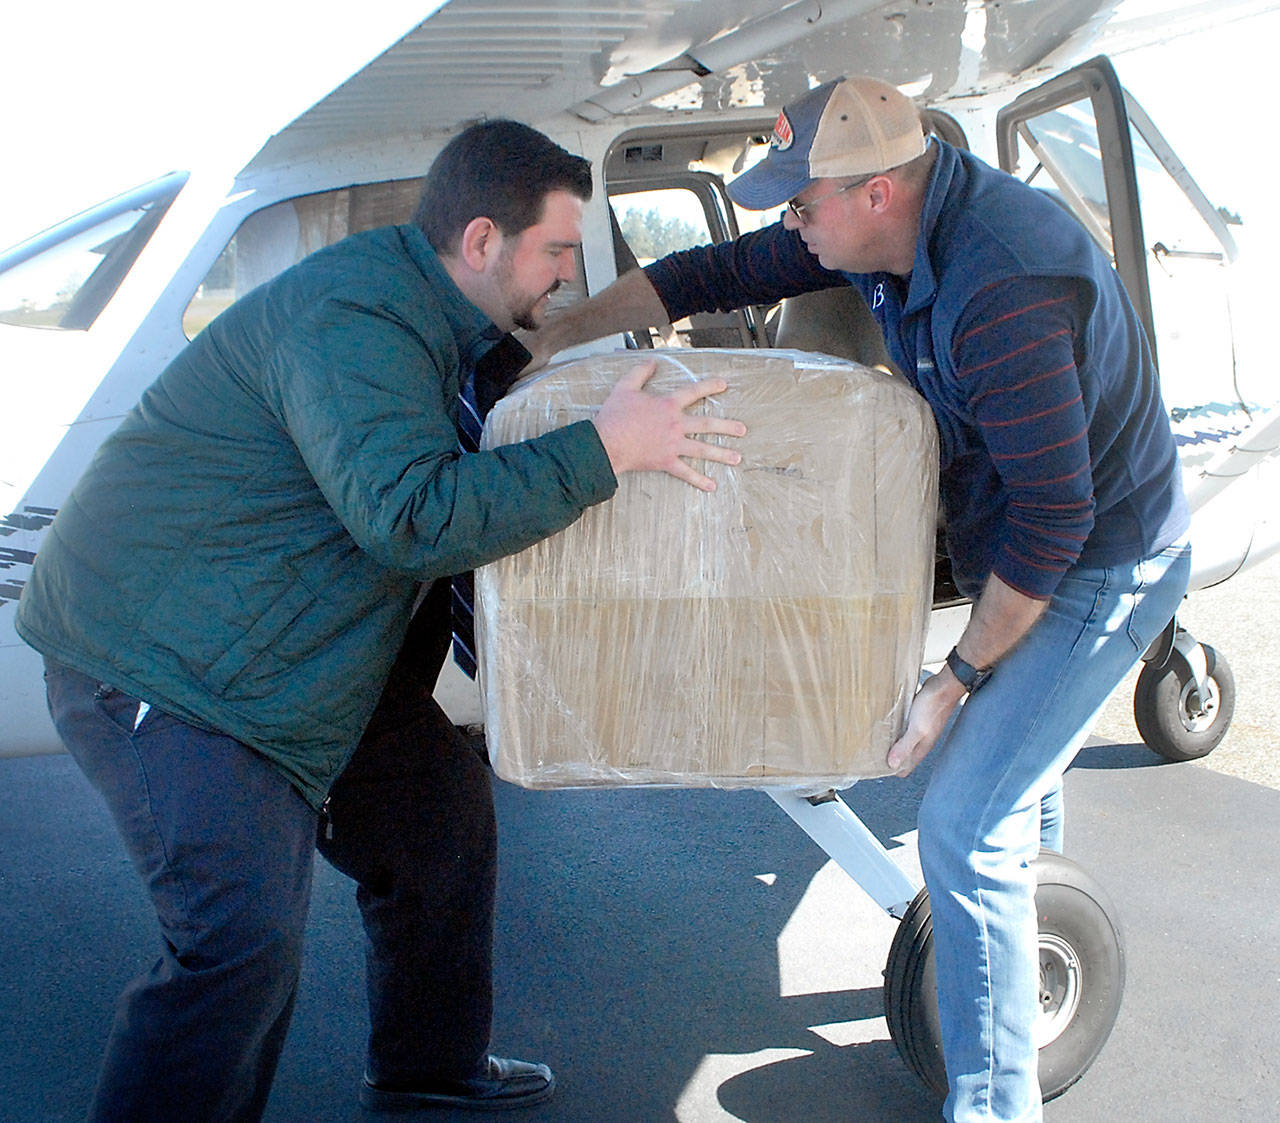 Bastian Hardtke, purchasing manager at Olympic Medical Center, left, takes a box from Boeing Employee’s Flying Association member Doug Weller of Seattle after two aircraft containing 30,000 surgical masks for the hospital arrived on Thursday, APril 16, at William R. Fairchild International Airport in Port Angeles. Photo by Keith Thorpe/Olympic Peninsula News Group